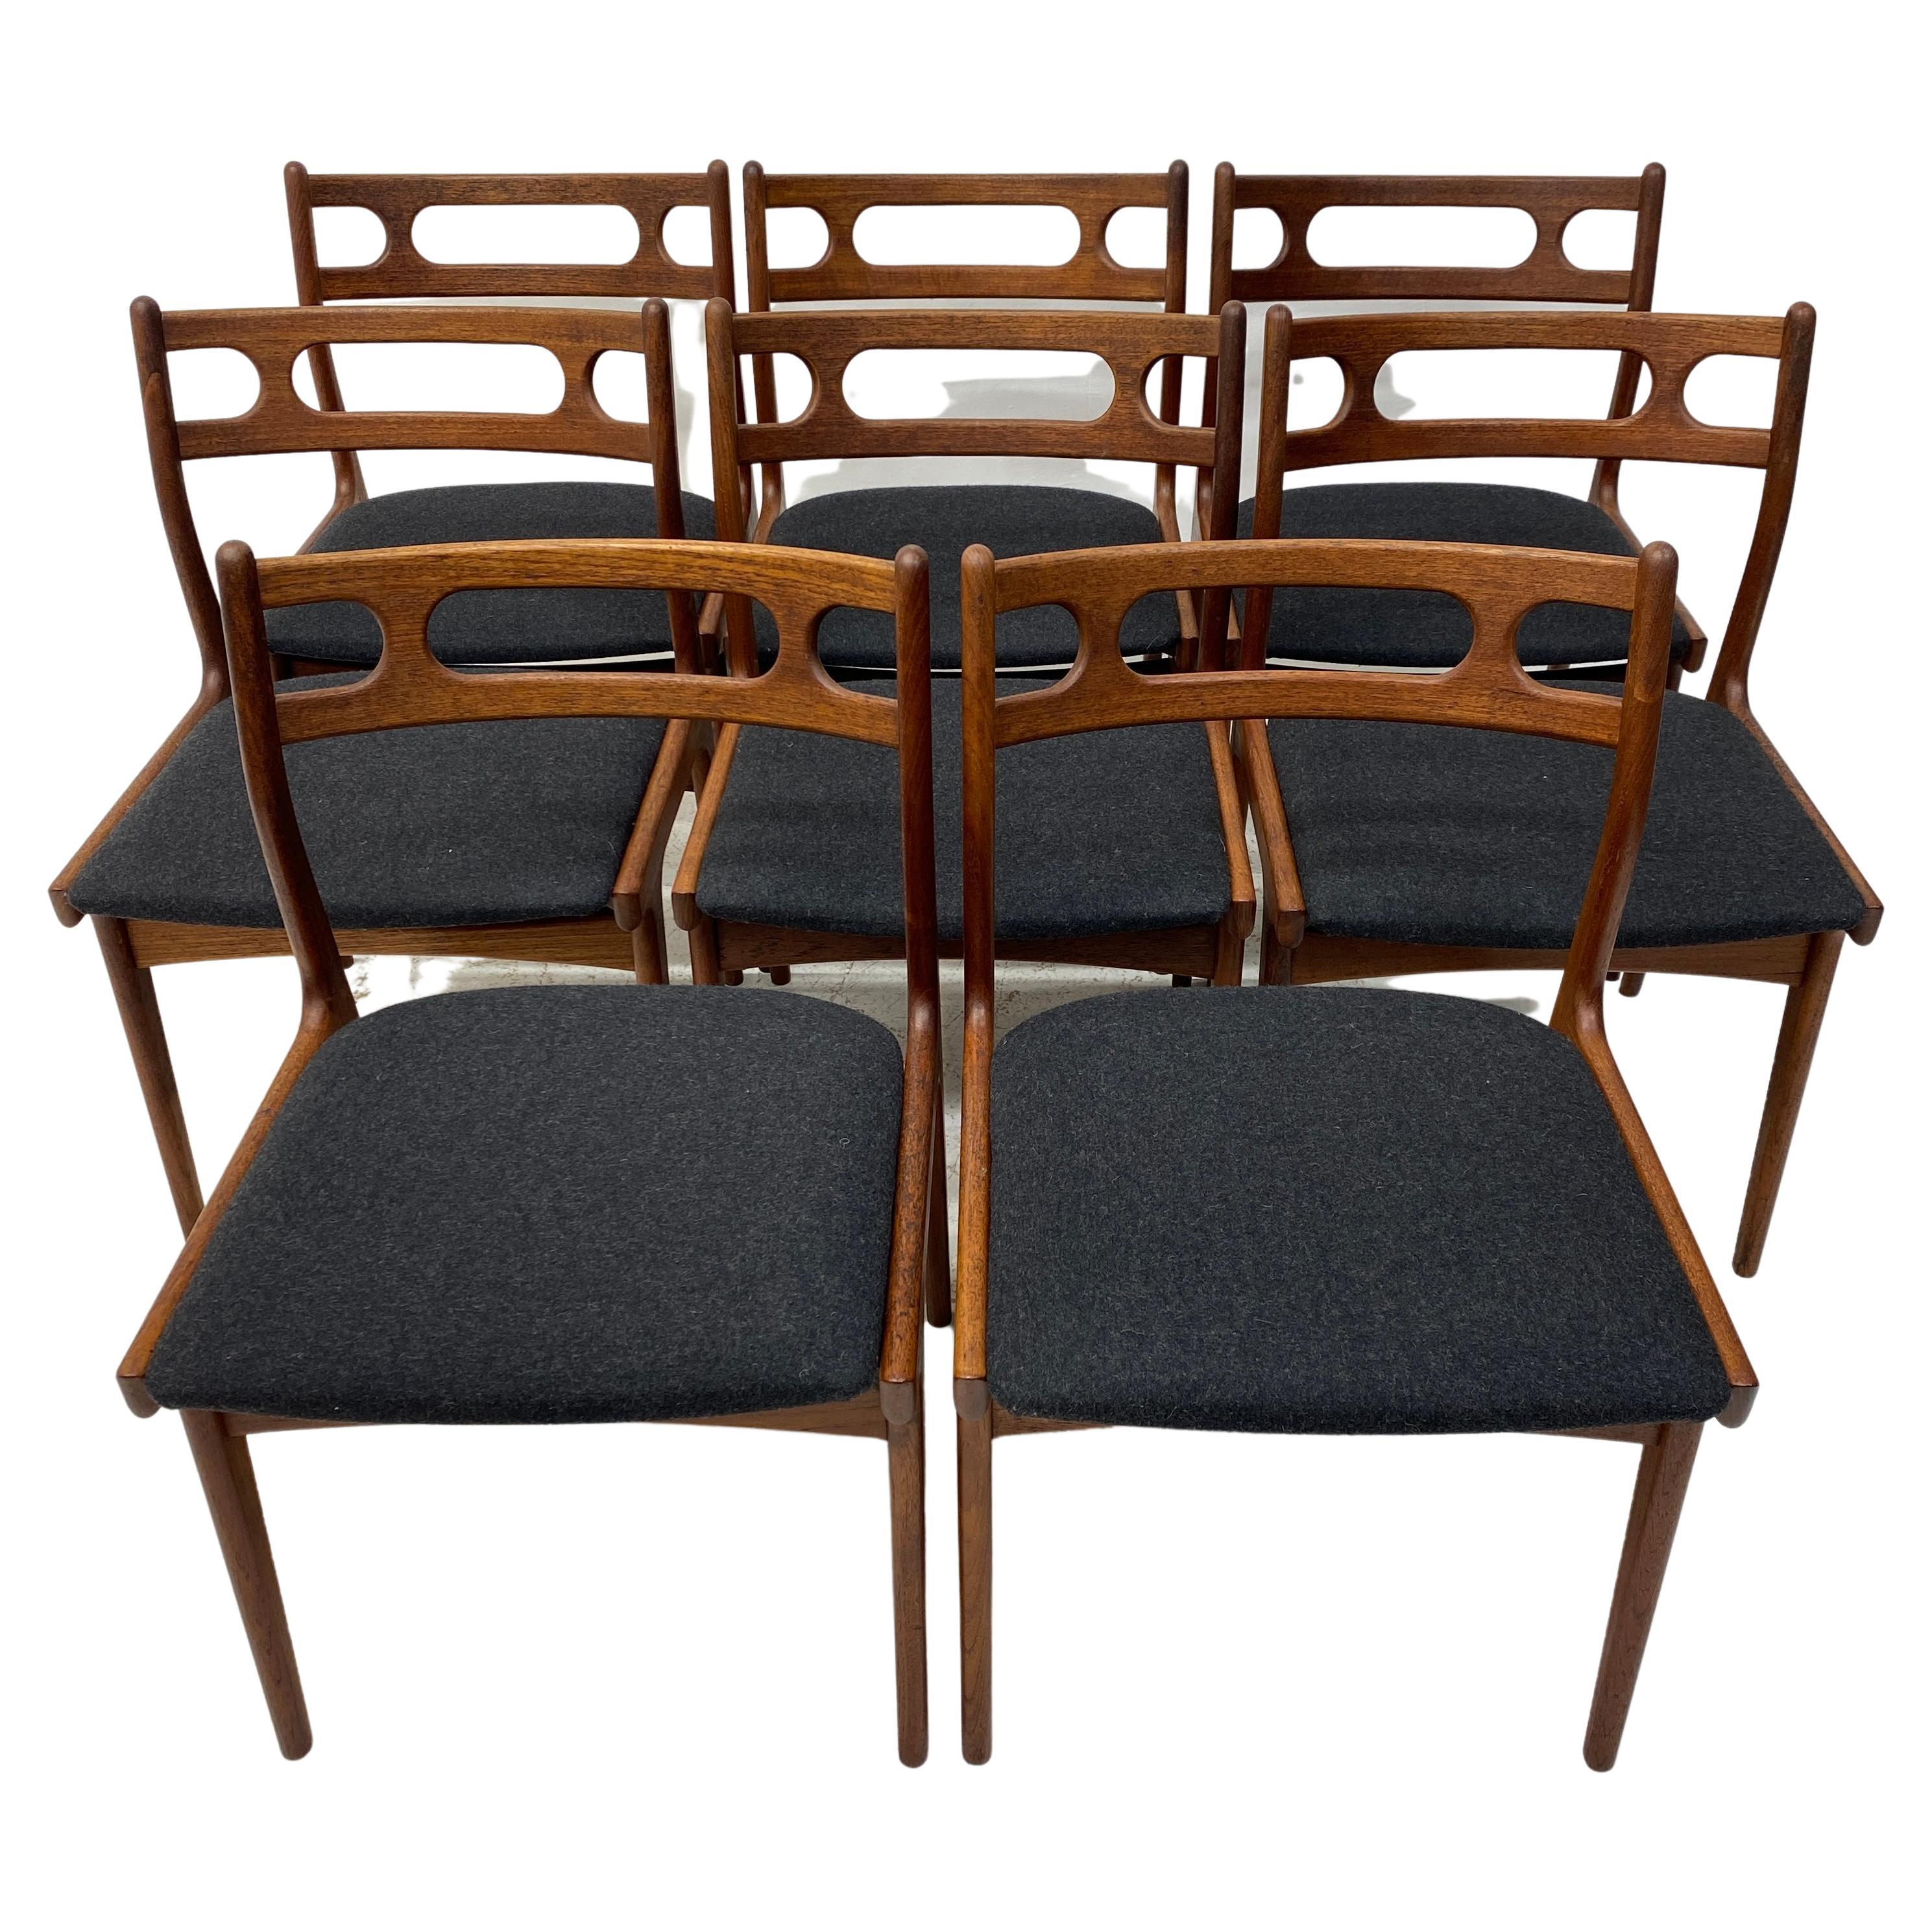 A truly superb set of eight Danish dining chairs designed by Johannes Anderson & manufactured by Uldum Mobelfabrik. They are midcentury circa 1960s dining chairs. Model 138. The dining chairs are constructed of solid teak with a very active grain.